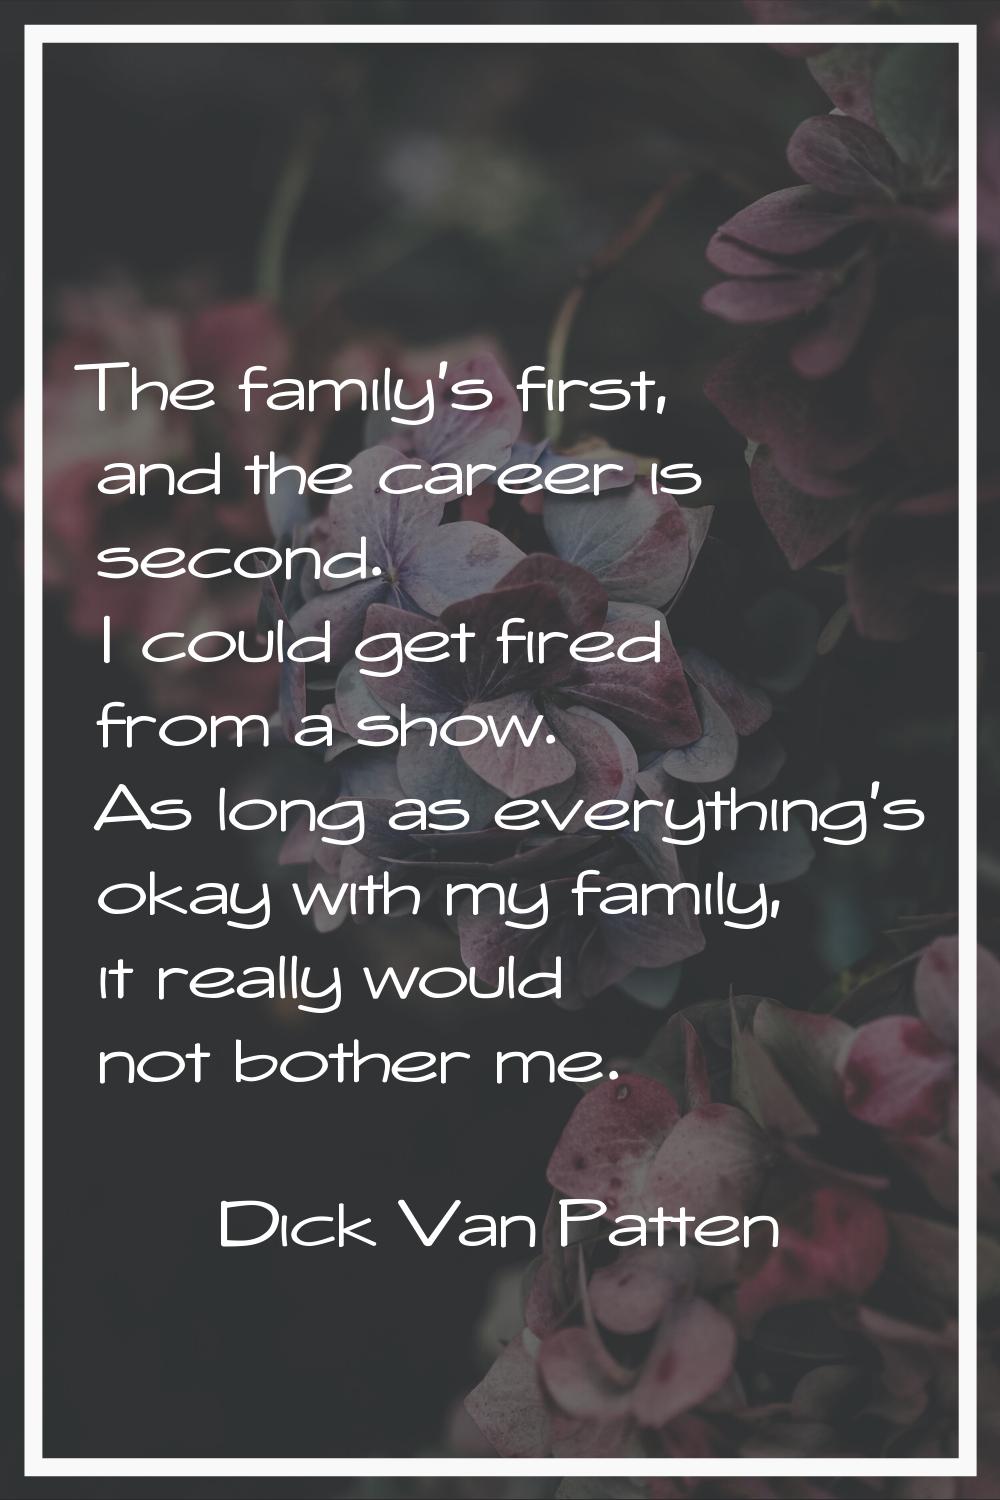 The family's first, and the career is second. I could get fired from a show. As long as everything'